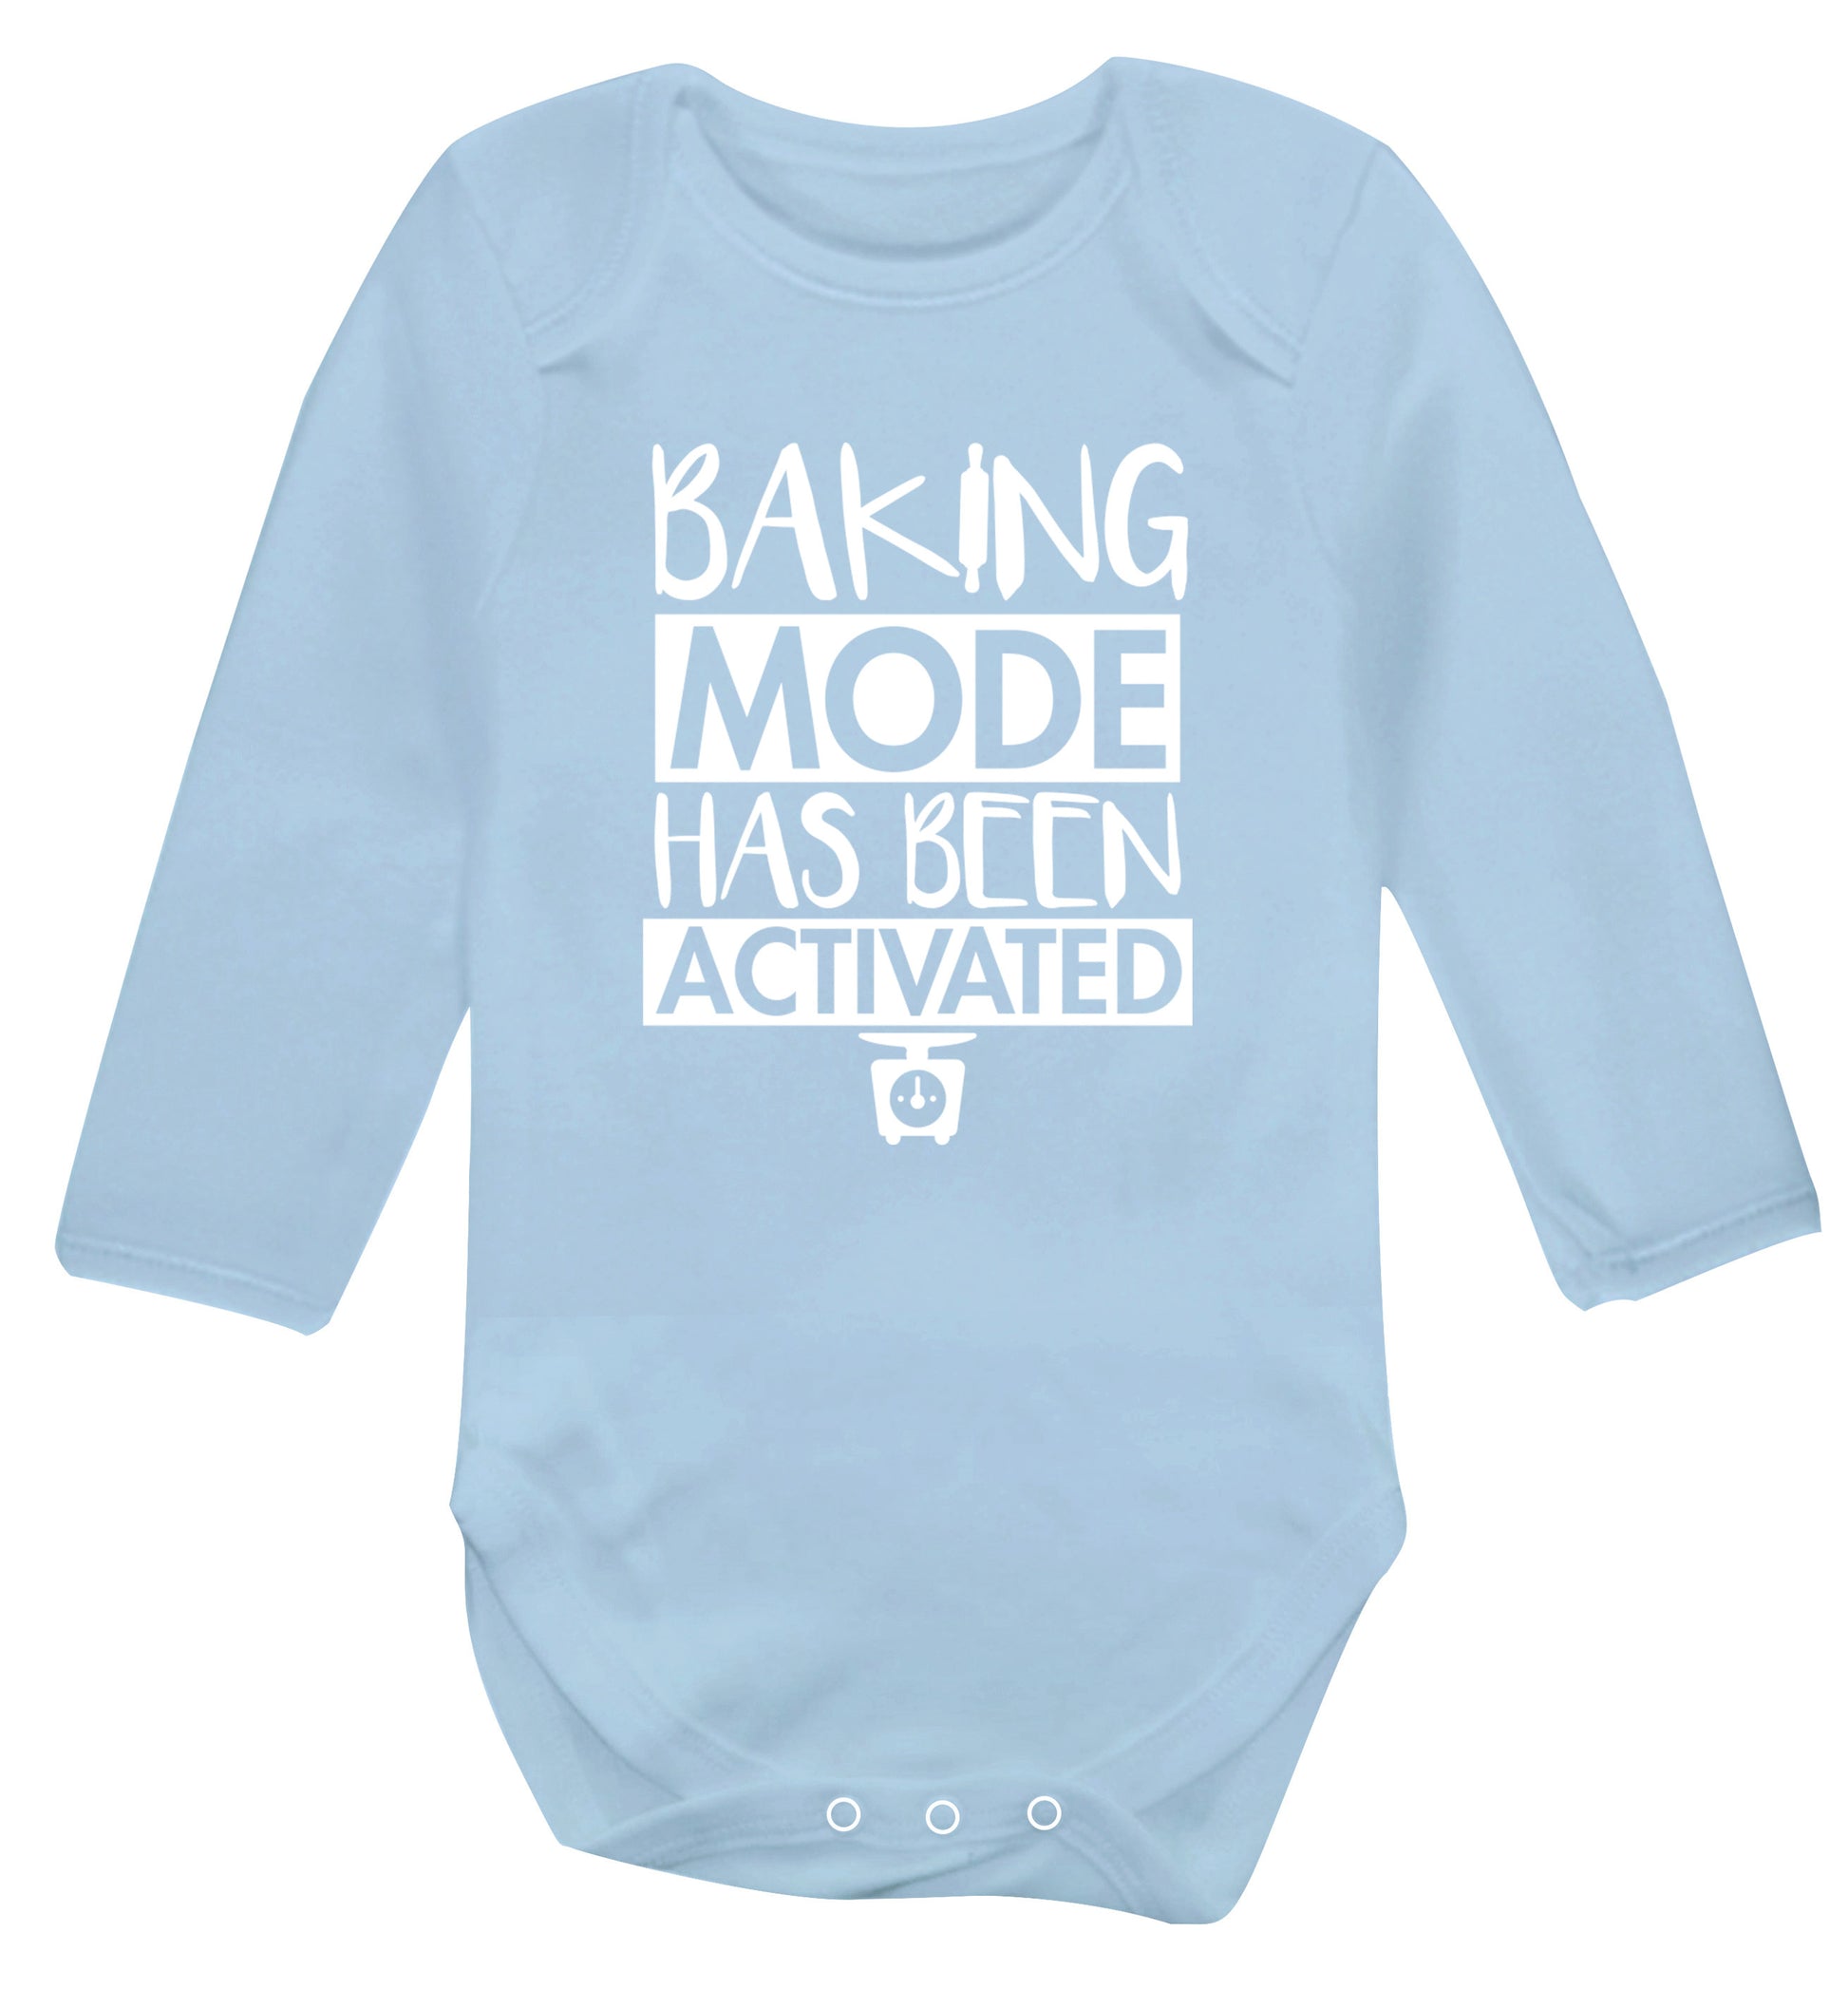 Baking mode has been activated Baby Vest long sleeved pale blue 6-12 months